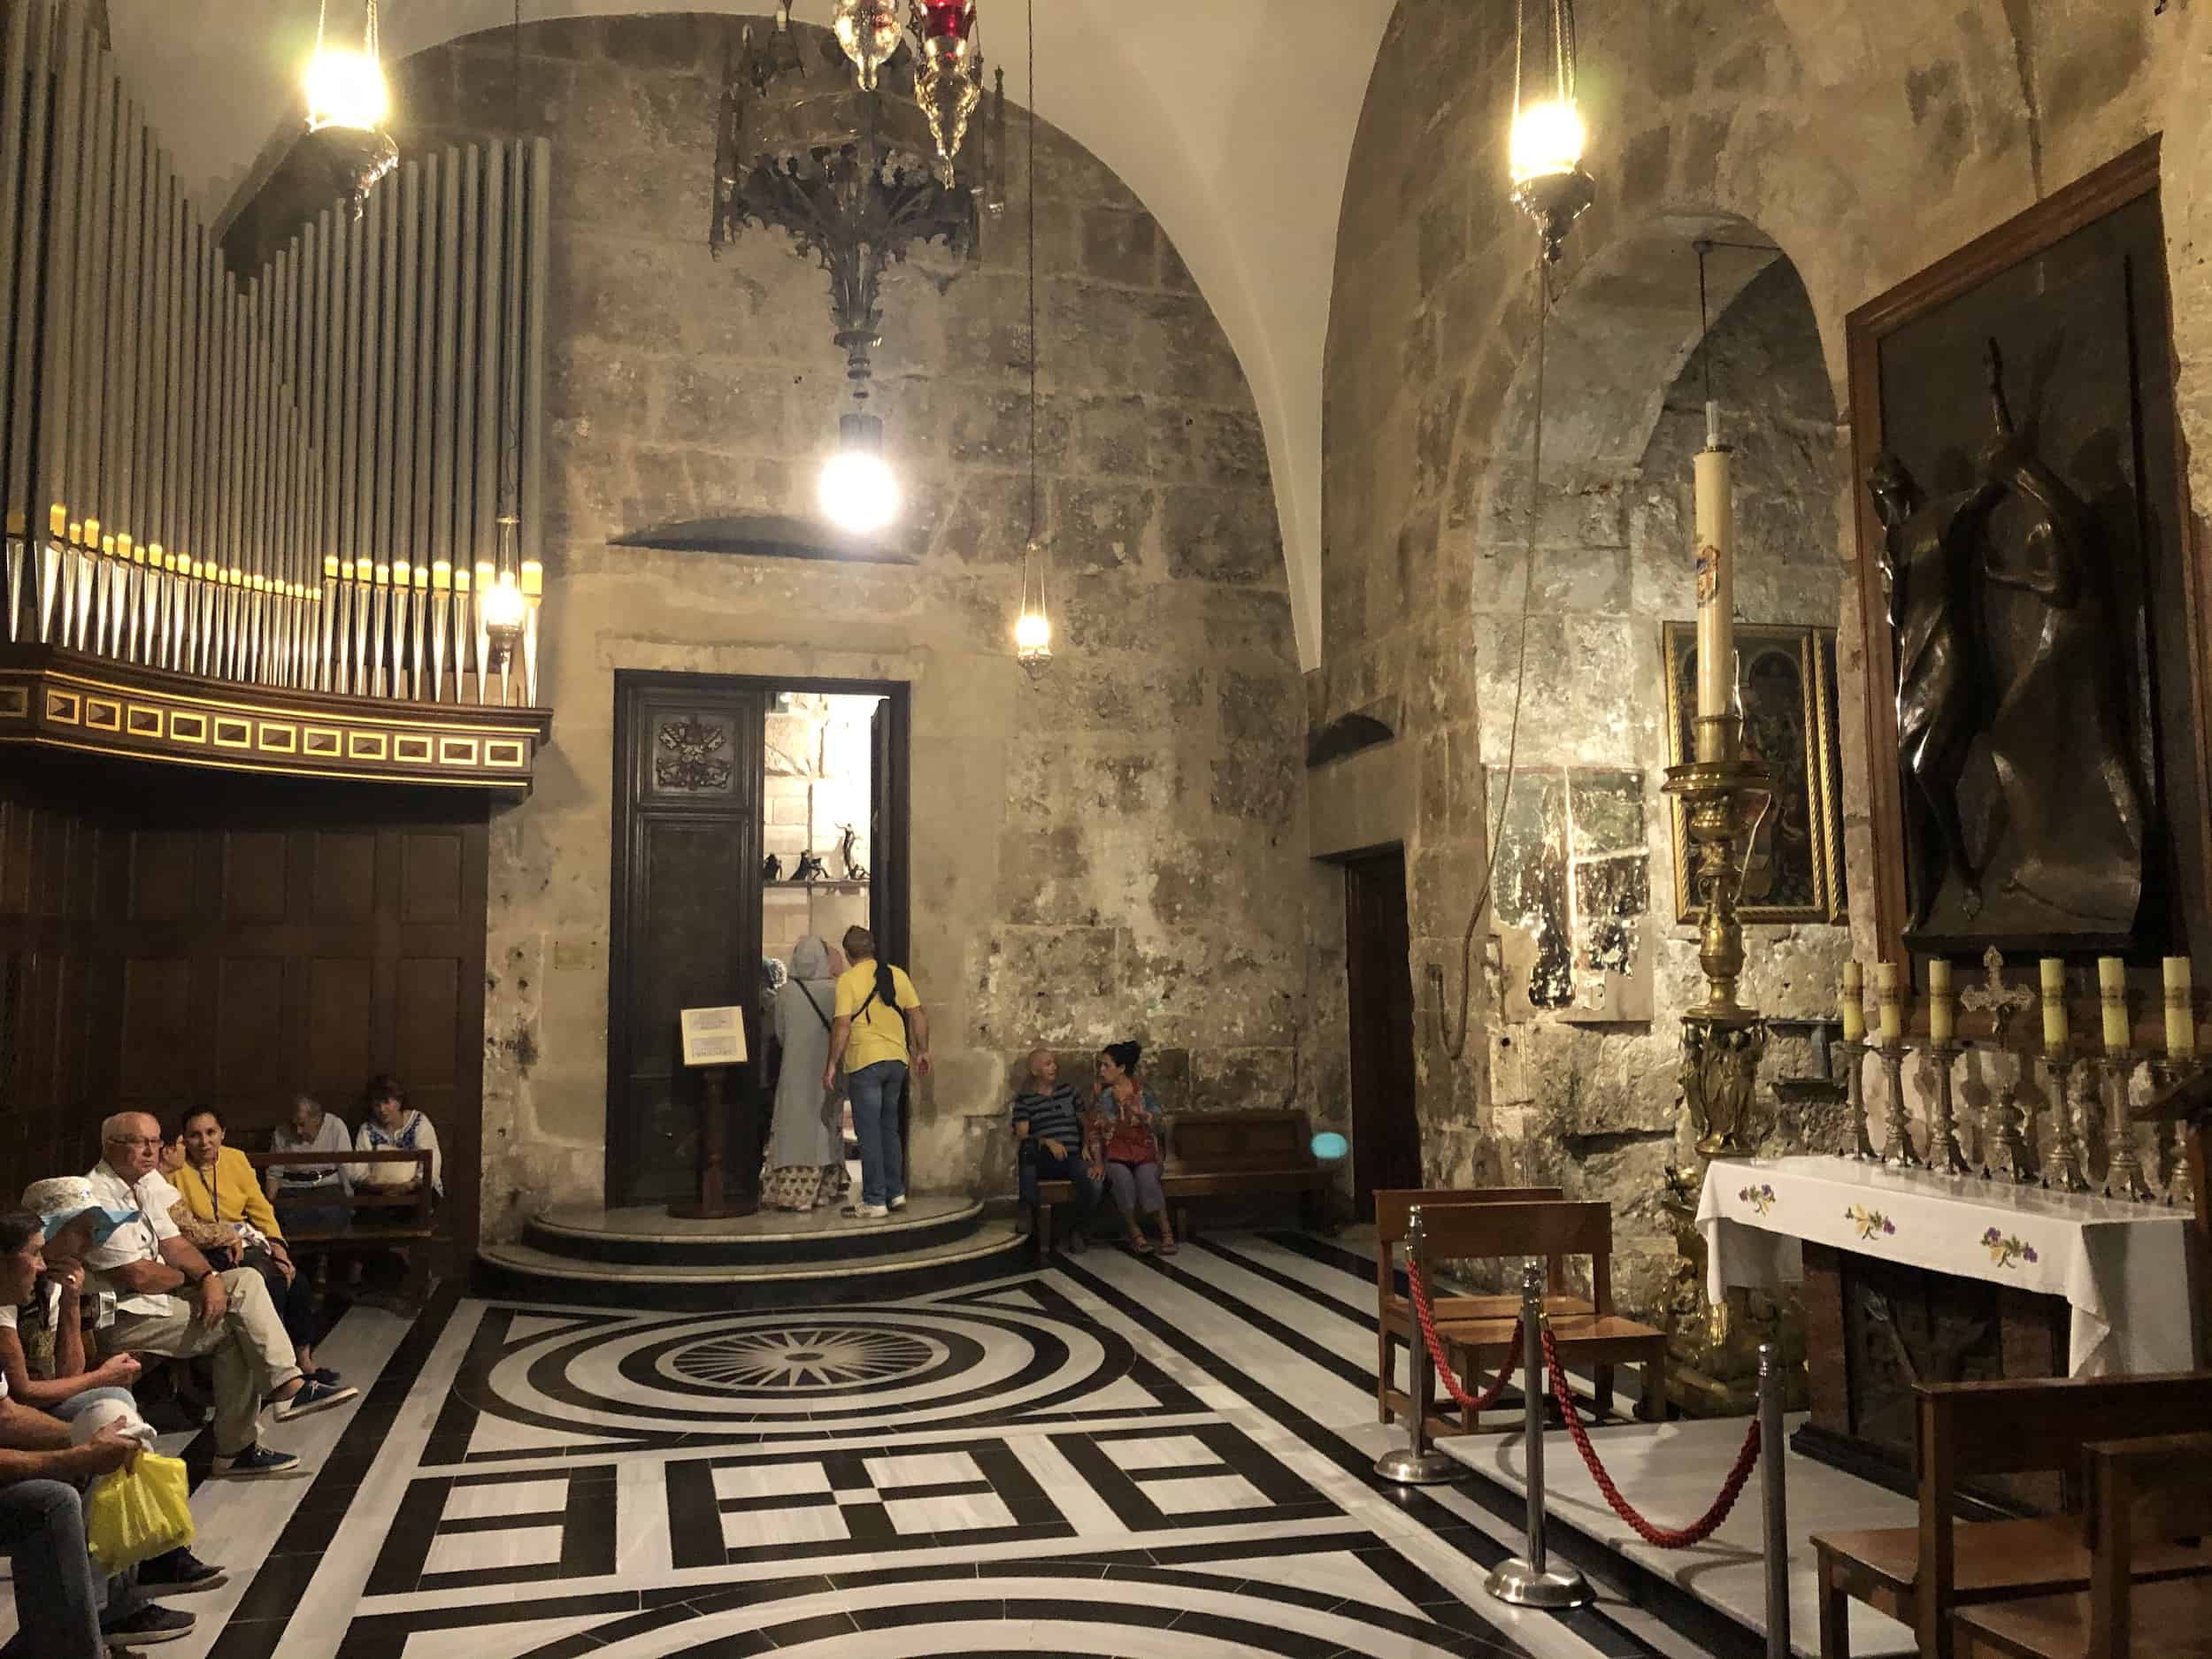 Chapel of Mary Magdalene at the Church of the Holy Sepulchre in Jerusalem